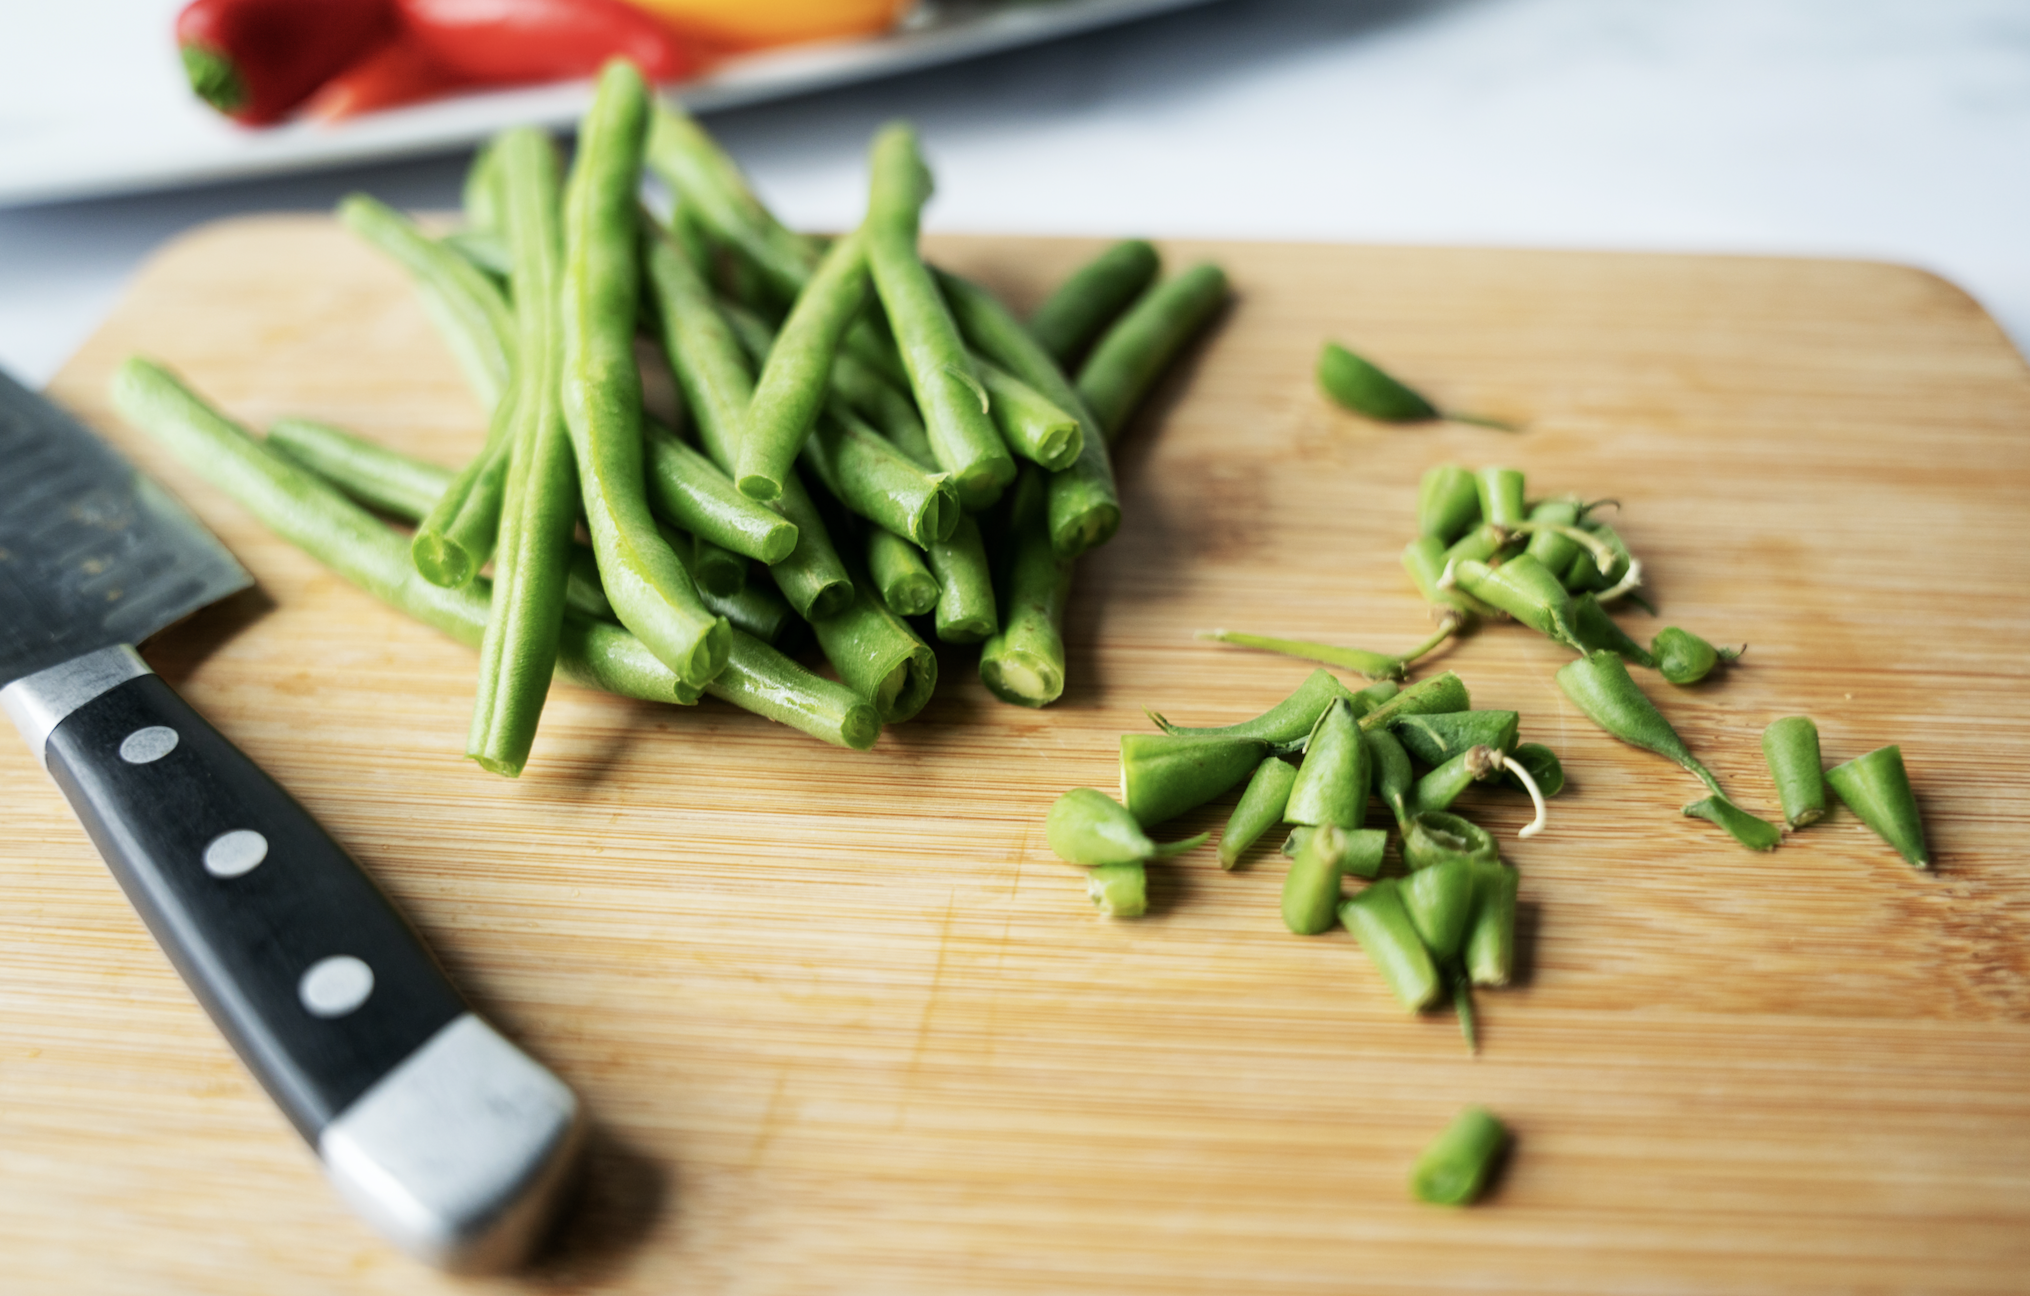 Green beans on board with ends cut off